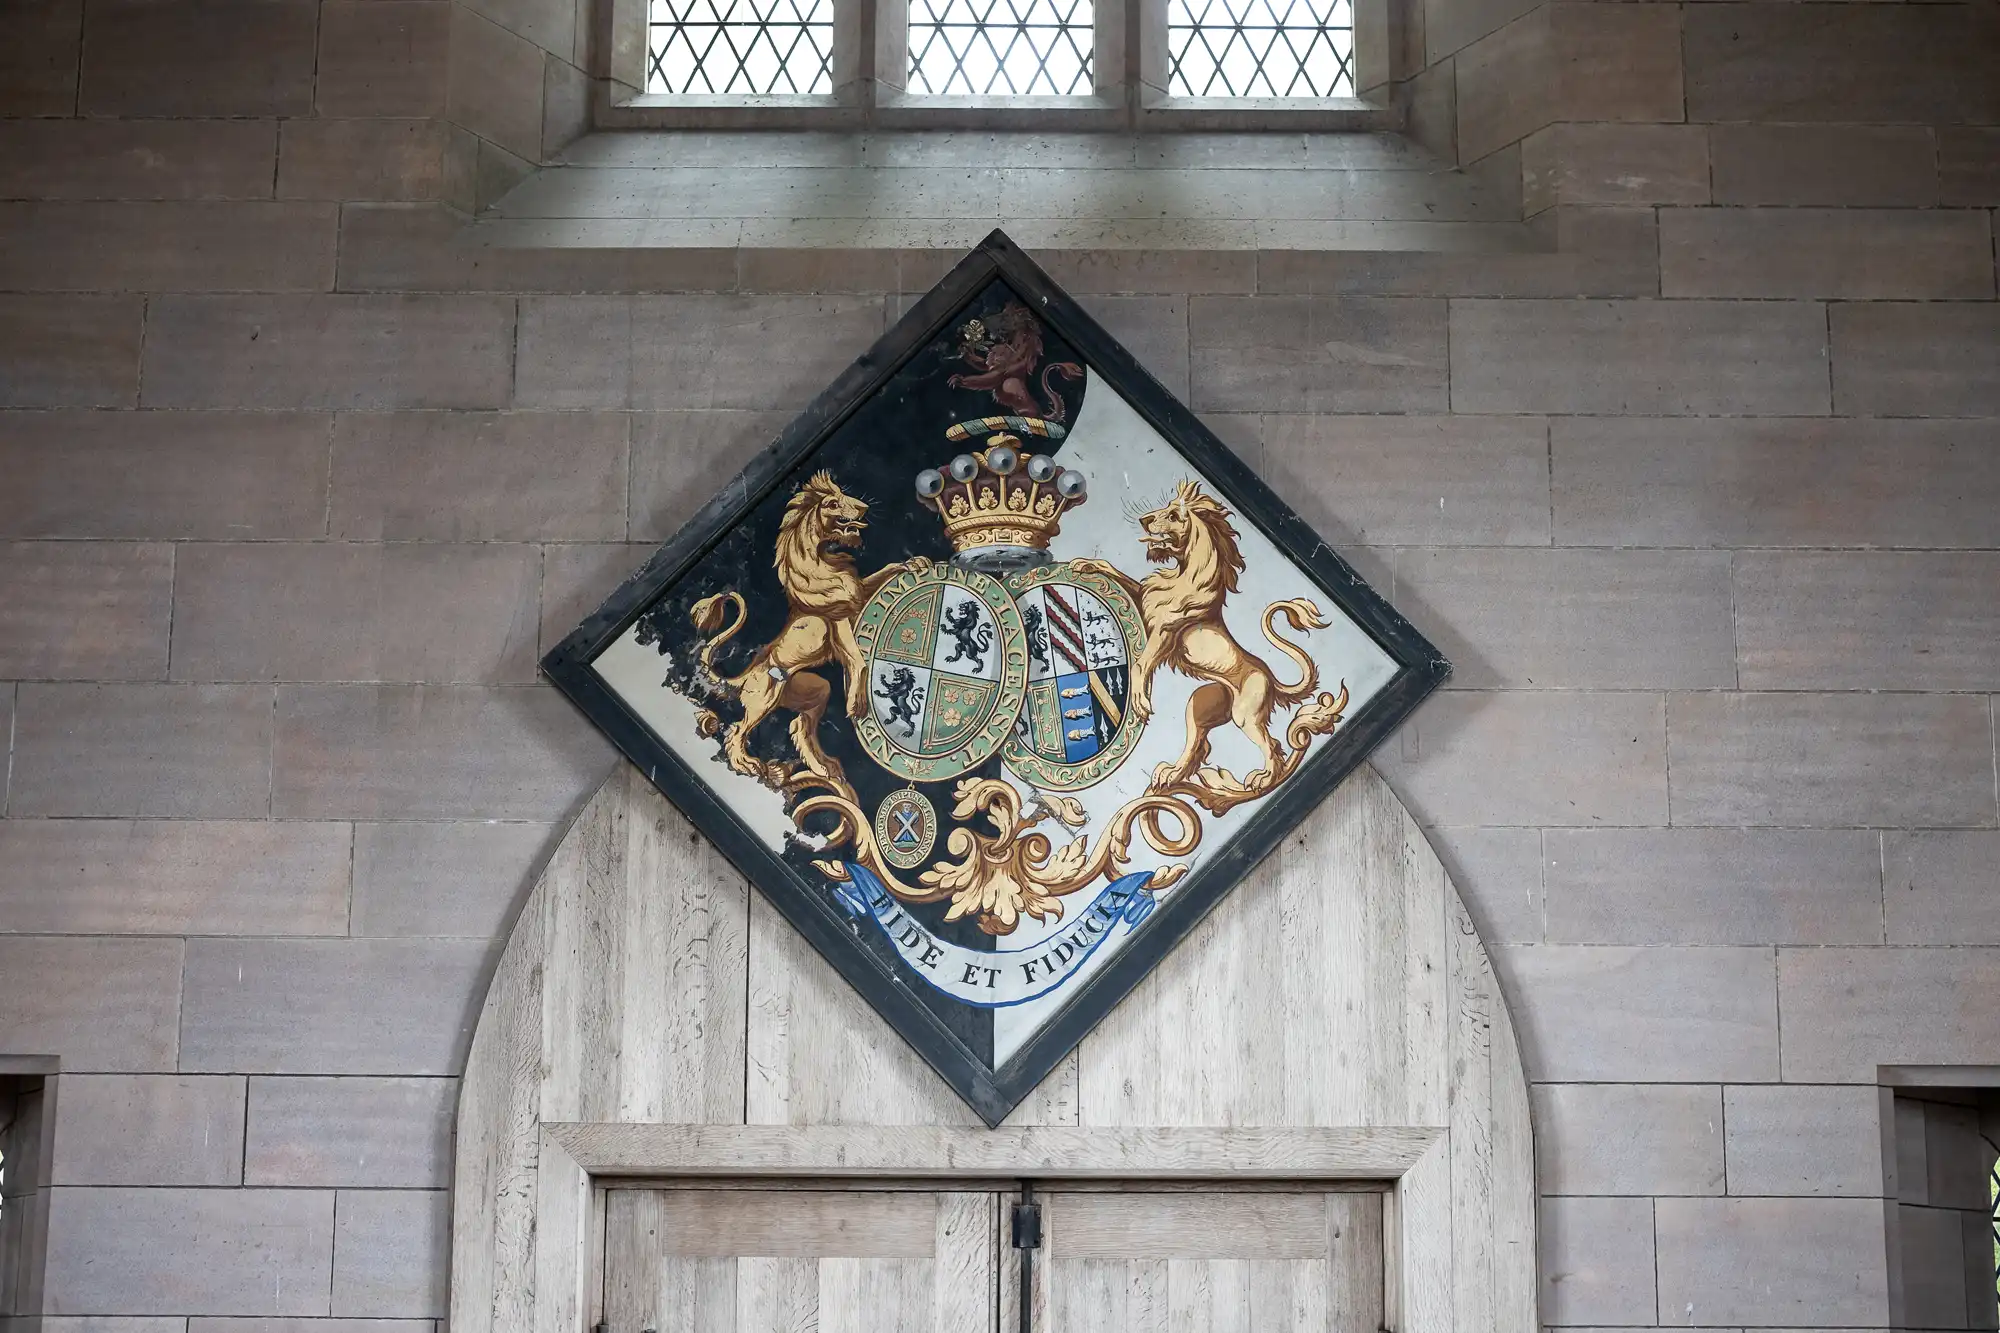 A heraldic coat of arms mounted above a wooden door inside a stone building, featuring a shield with a lion and a unicorn, and the motto "Dieu et mon droit.